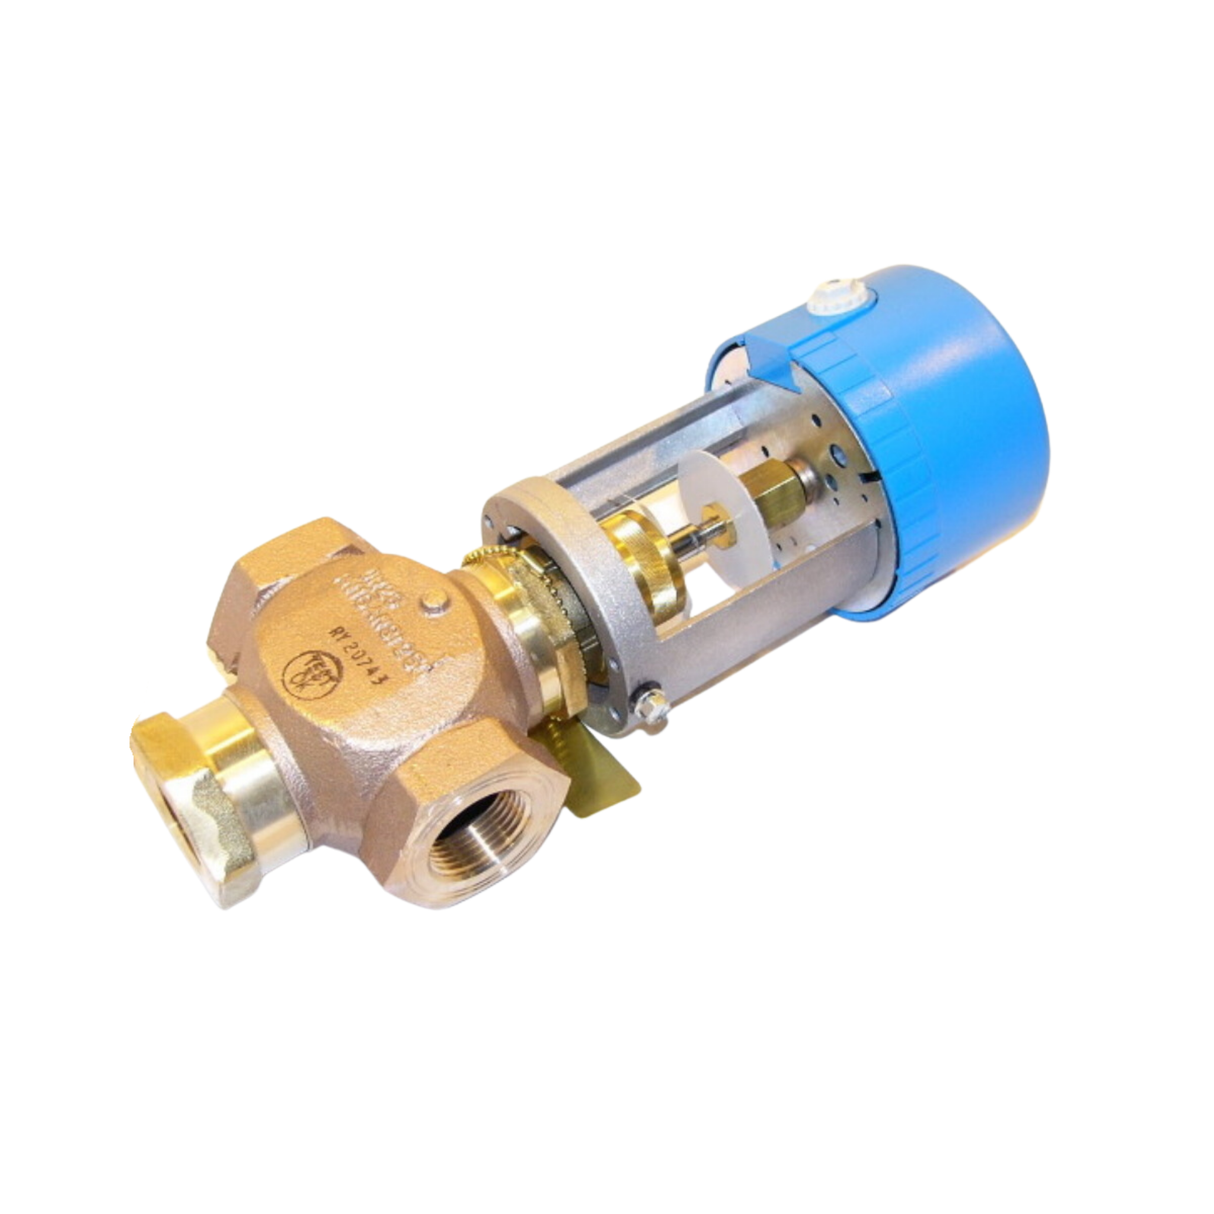 Johnson Controls VG7842NT+7150G 24VAC, 1" NPT Connection Size, 3 Way Mixing, Linear Flow, Non-Spring Return Three Wire, Incremental Actuator